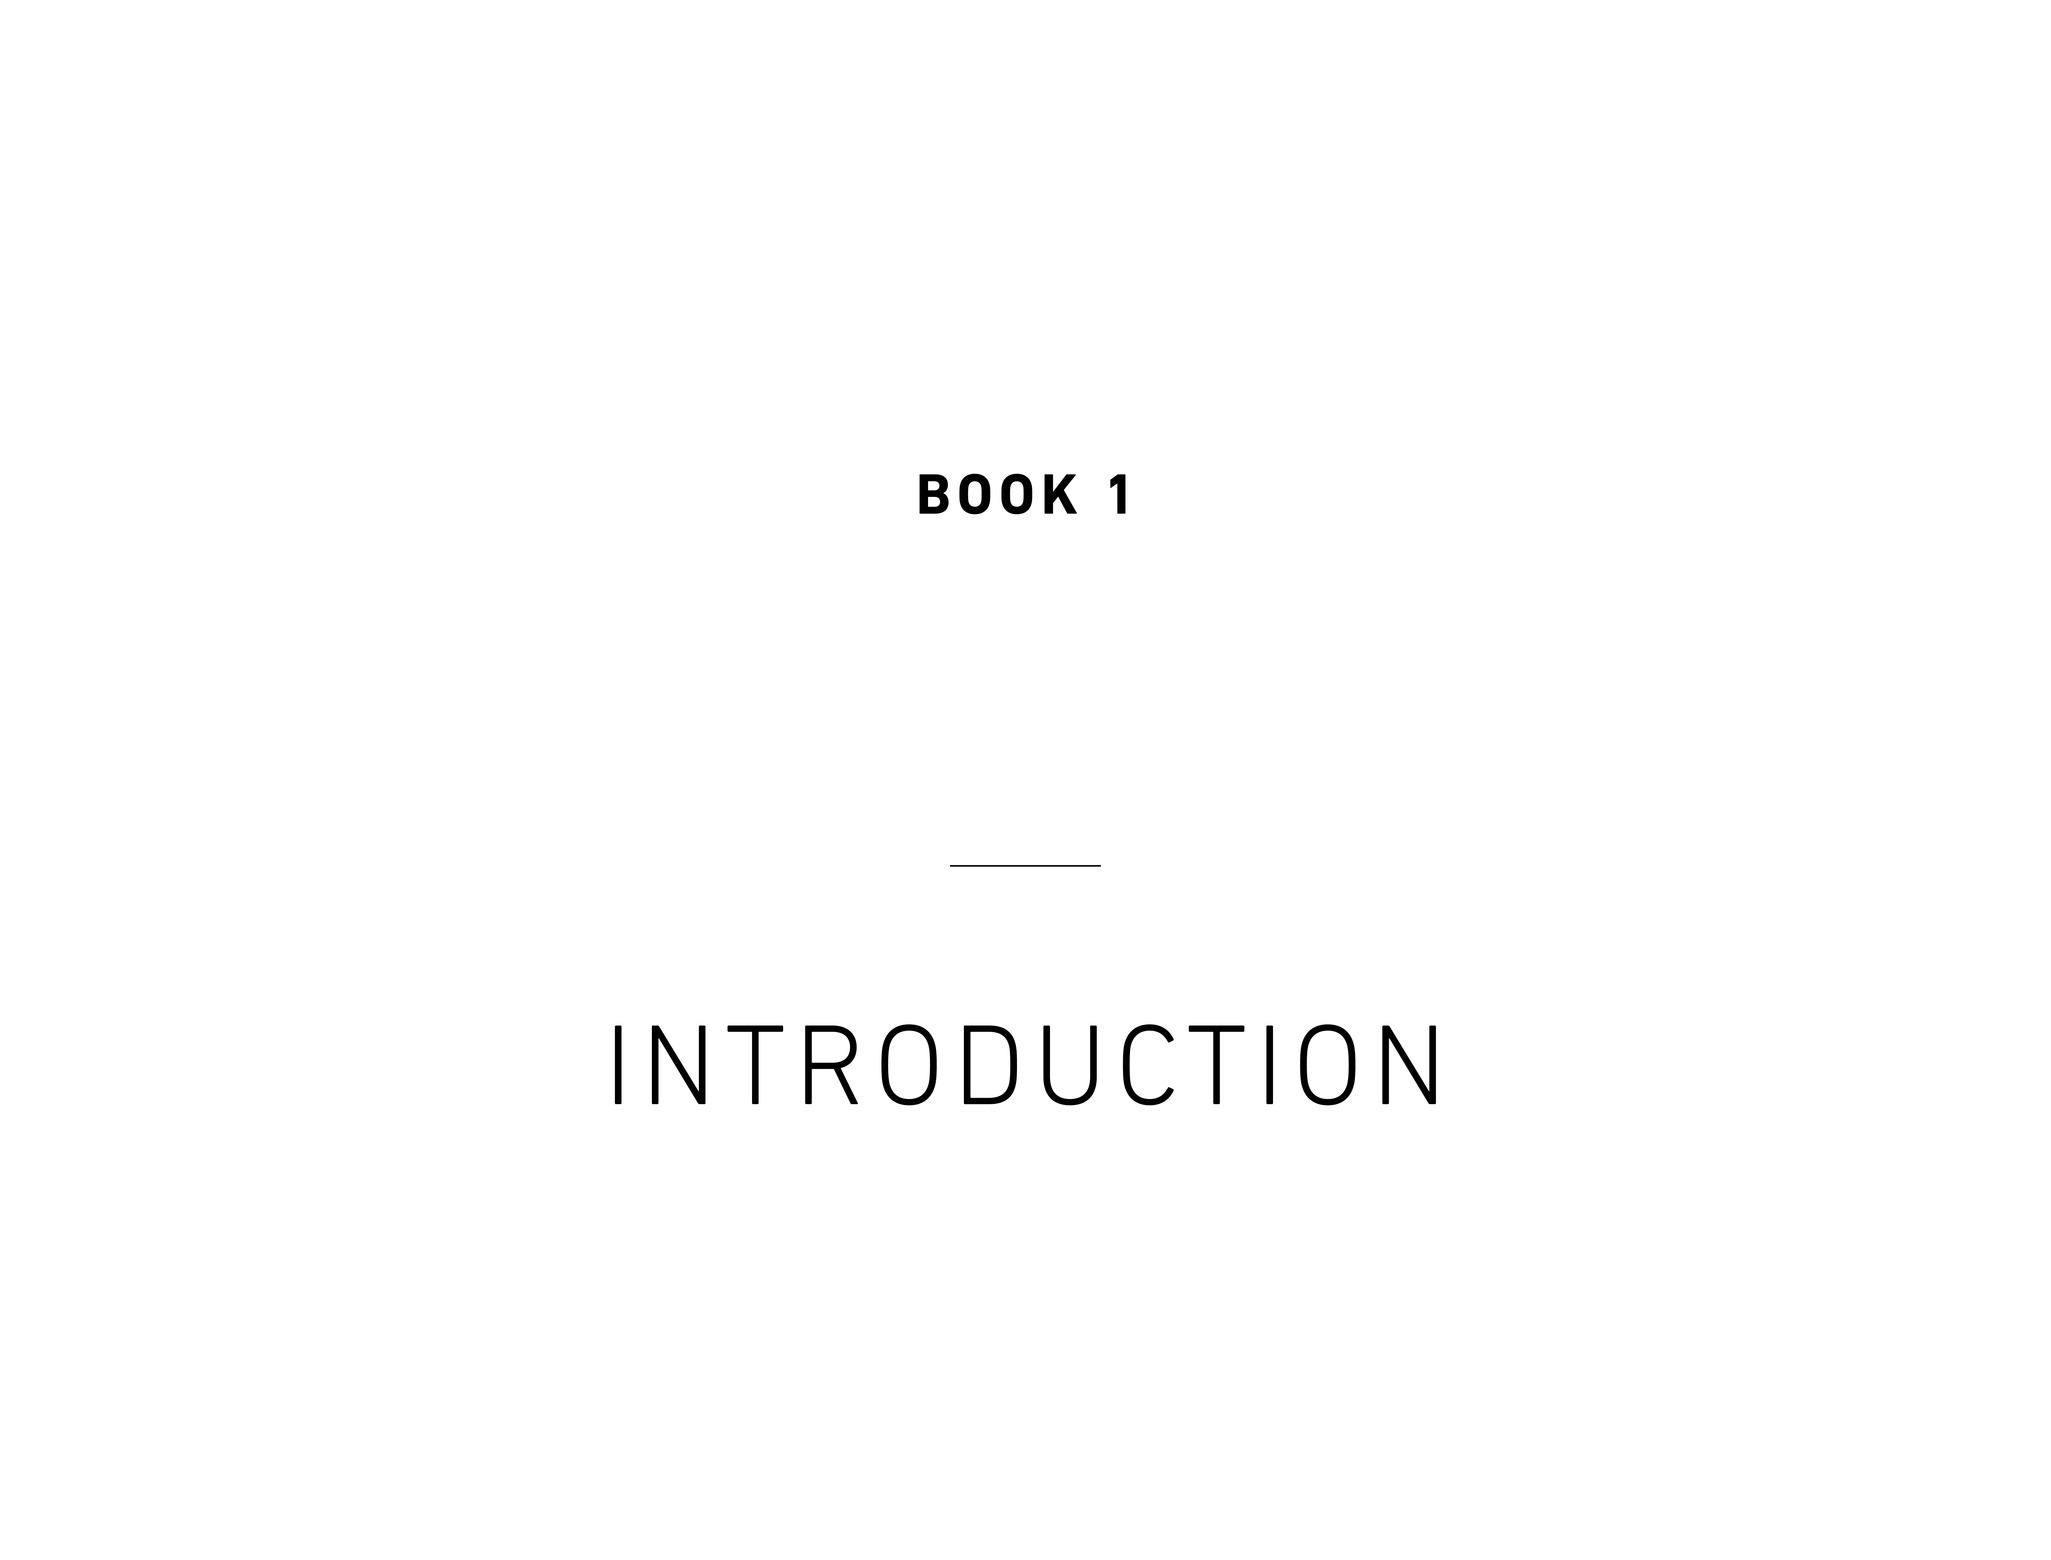 Book 1 Introduction